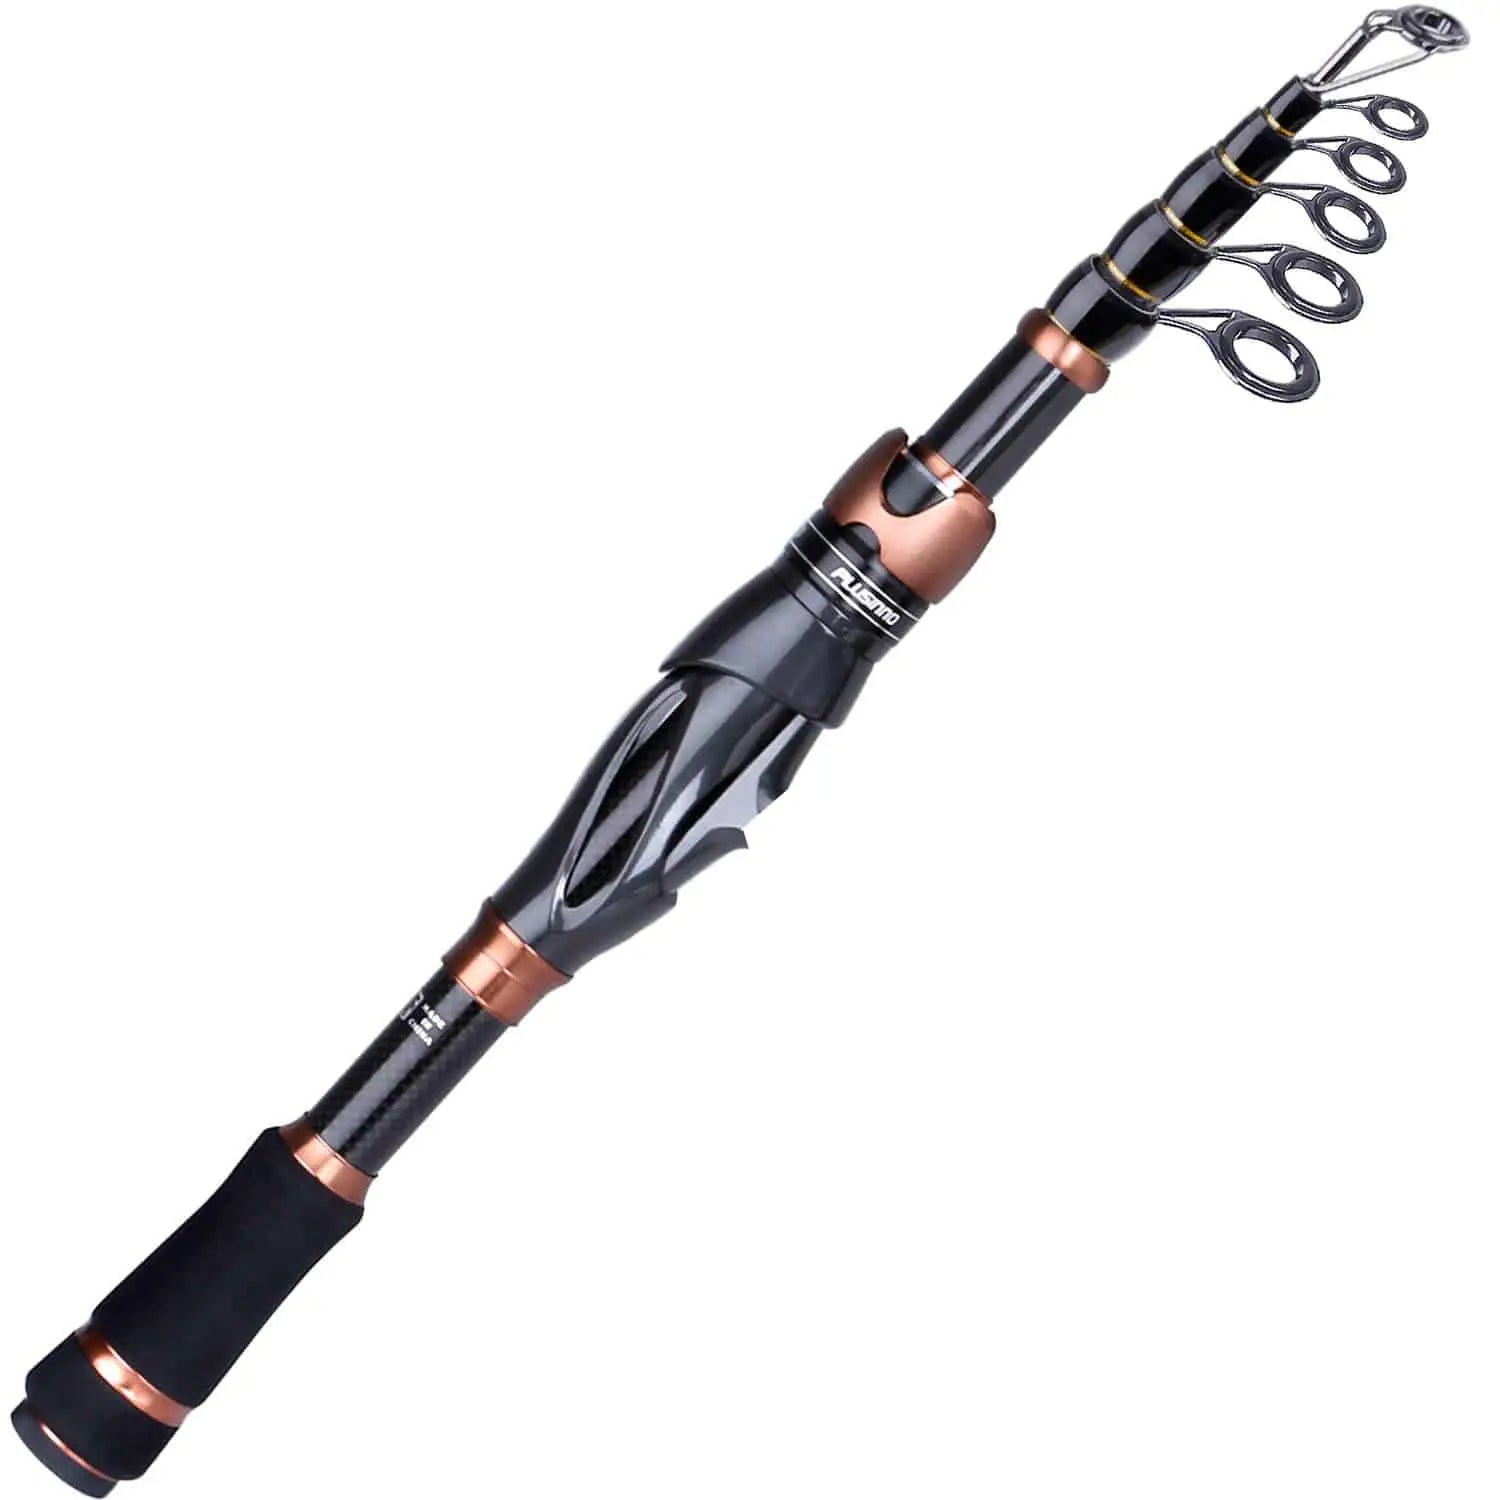 Welcome to the family!! My new “Plusinno” Telescopic Fishing pole (8.7